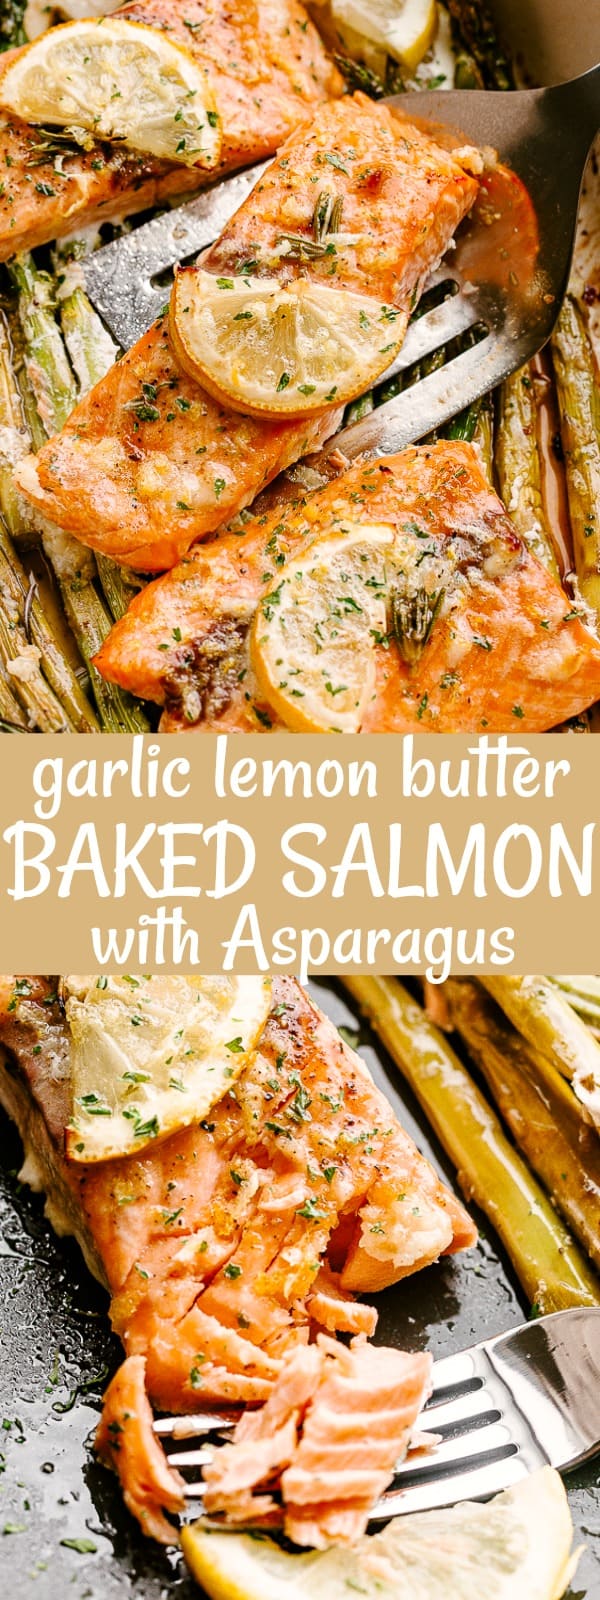 Oven Baked Salmon Recipe with Asparagus | Diethood